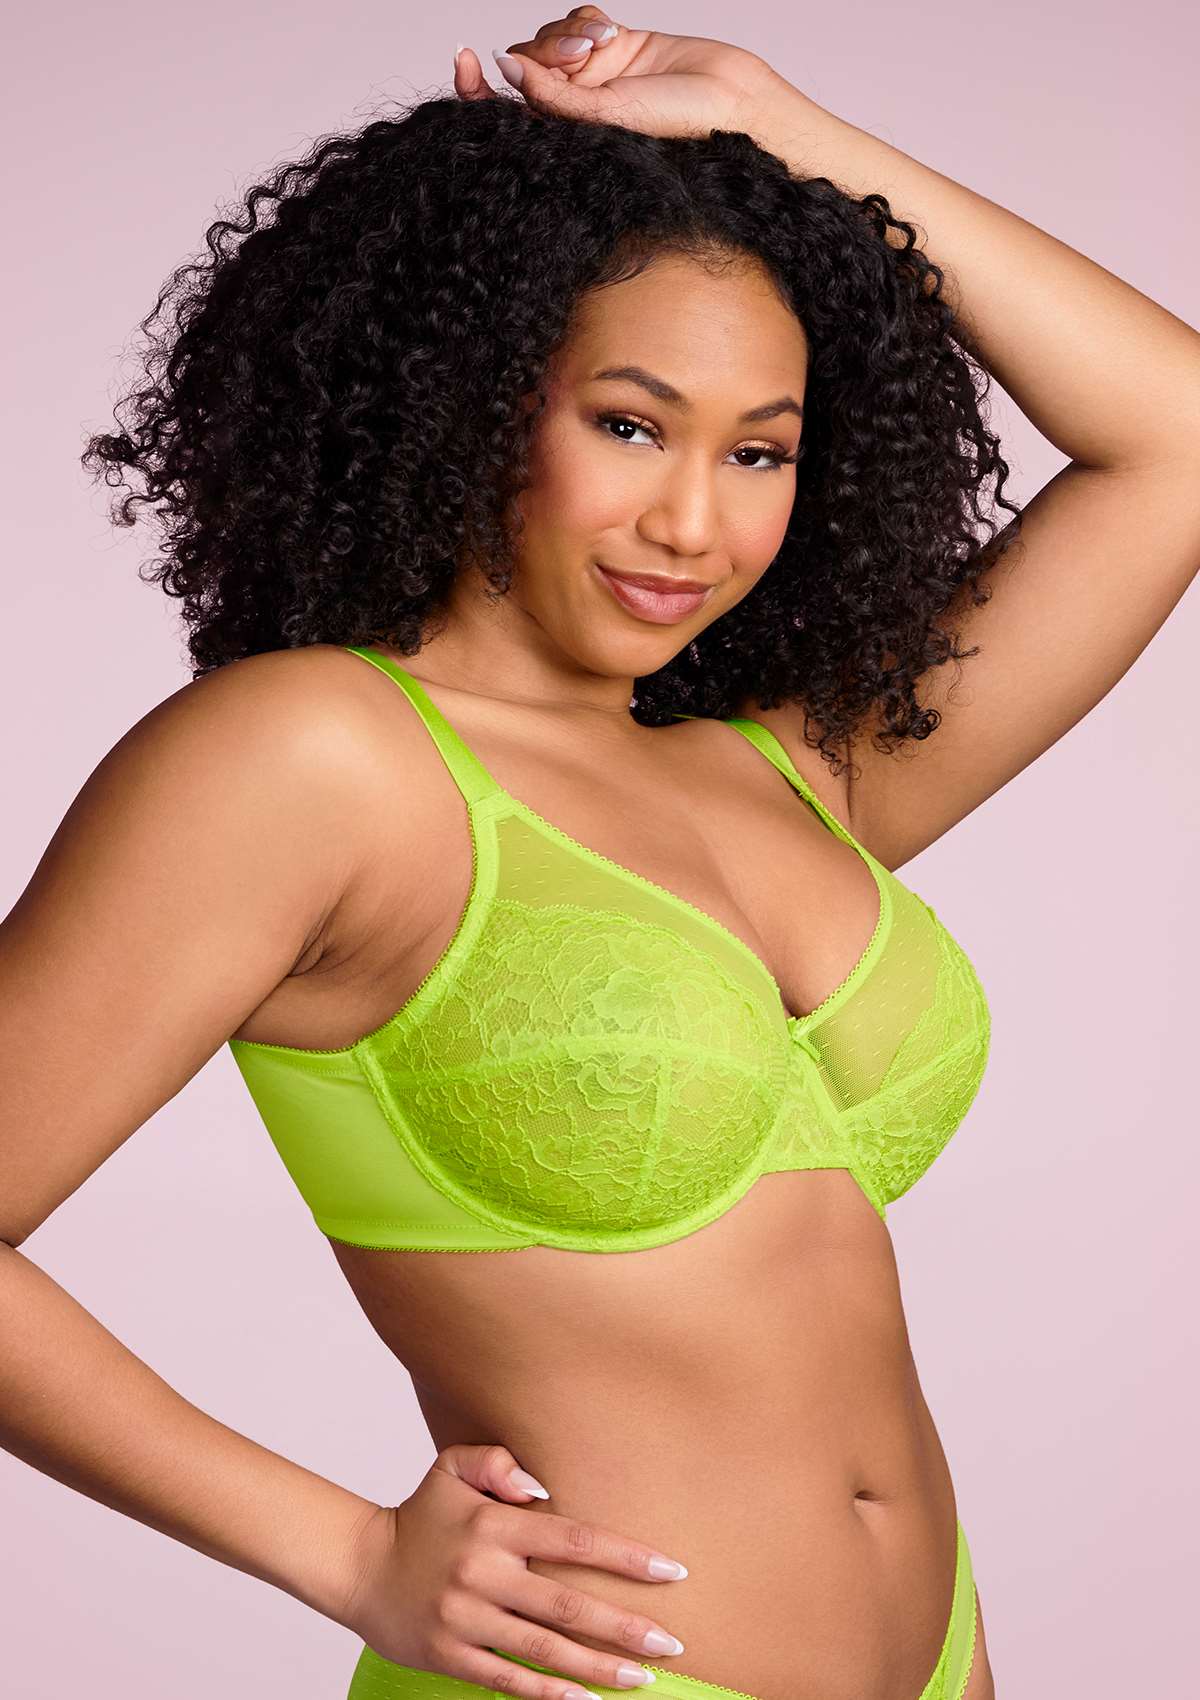 HSIA Enchante Full Cup Minimizing Bra: Supportive Unlined Lace Bra - Lime Green / 42 / H